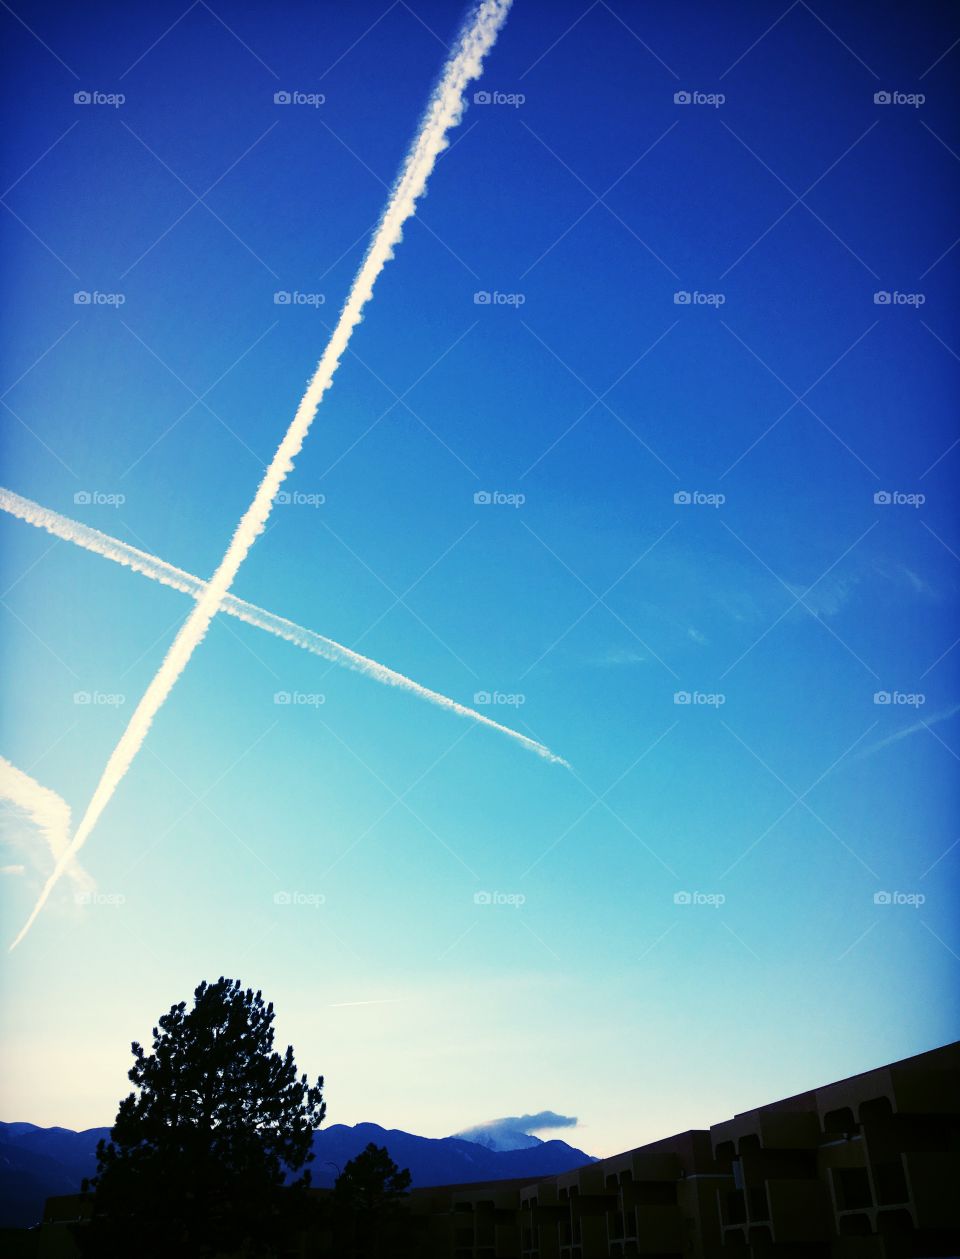 X marks the spot 